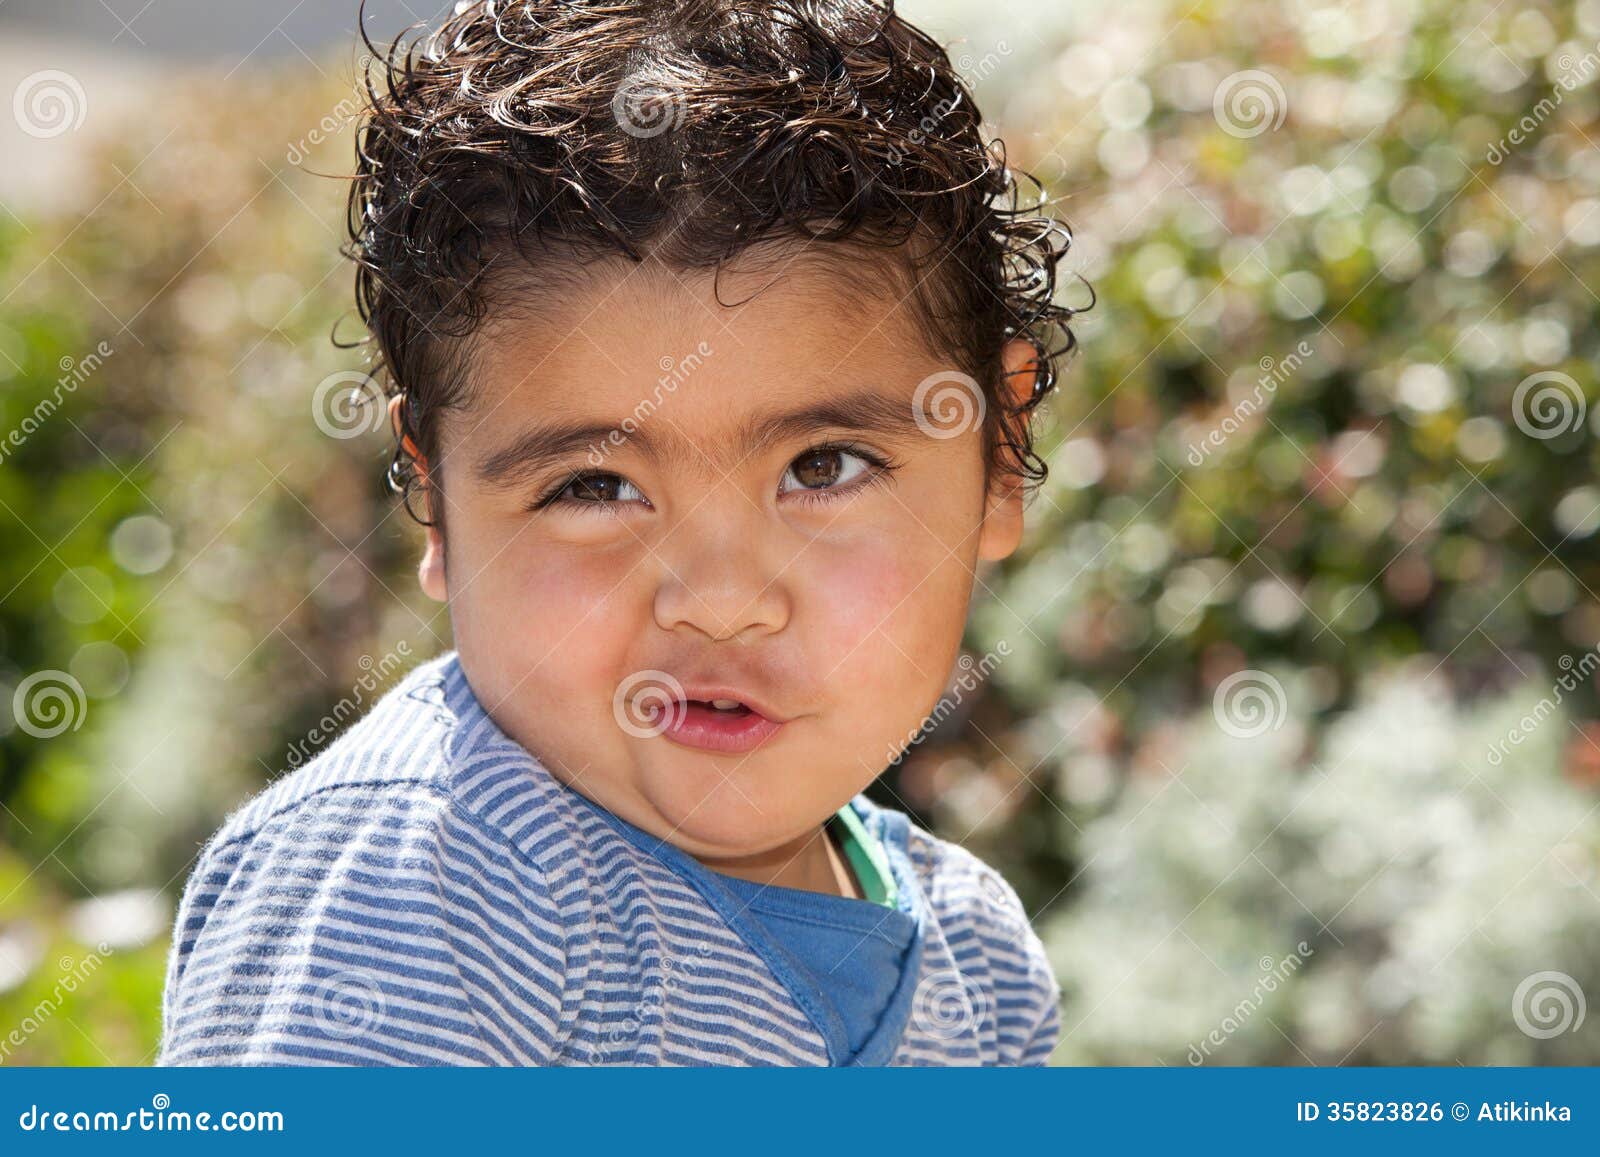 Cute toddler stock photo. Image of child, expression ...